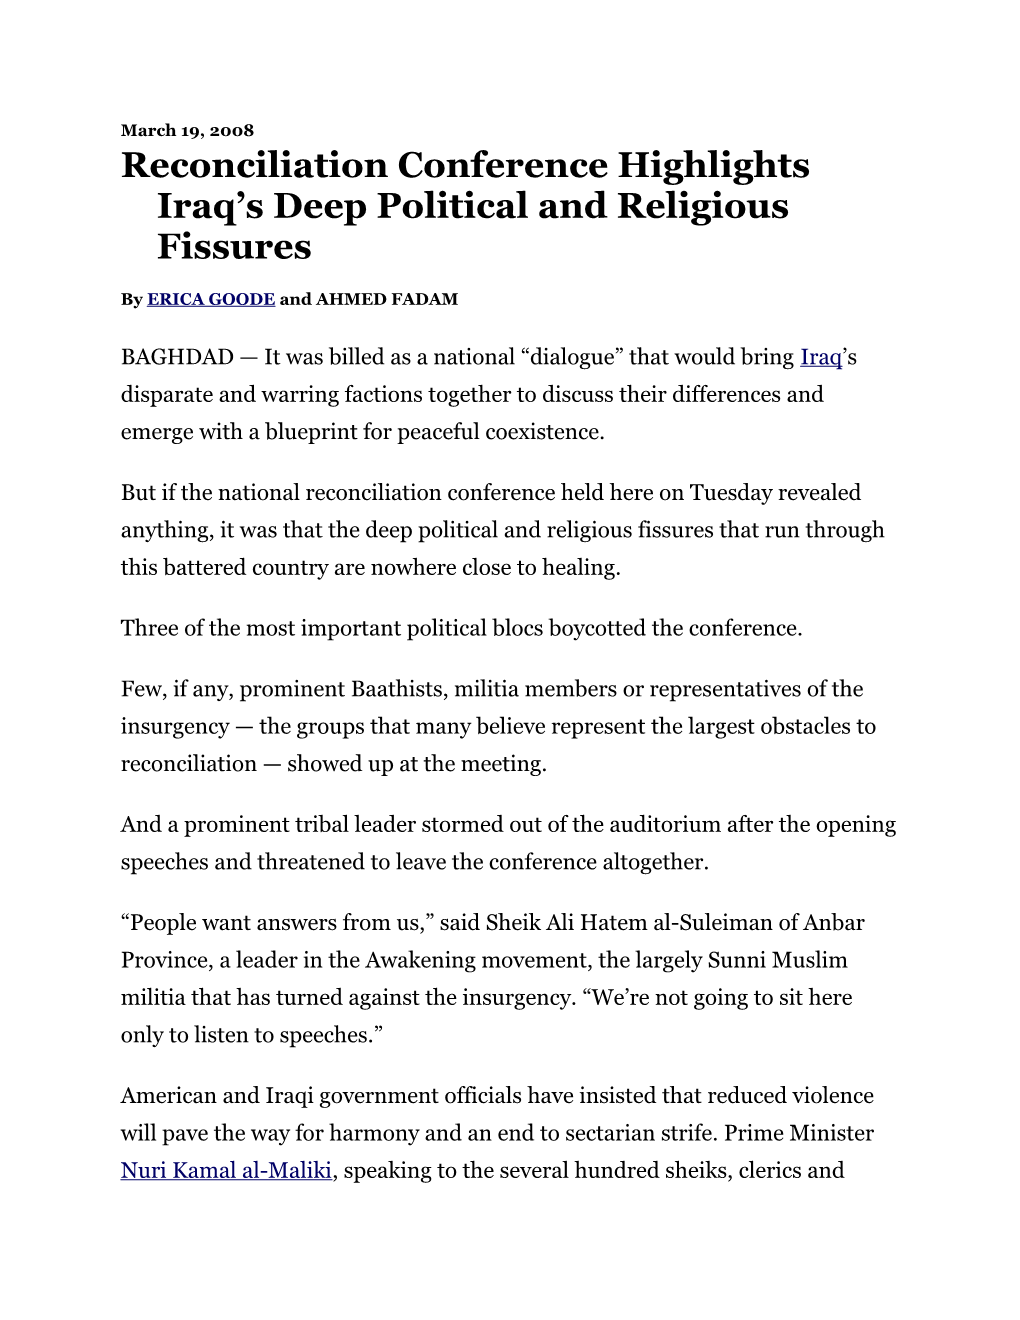 Reconciliation Conference Highlights Iraq S Deep Political and Religious Fissures